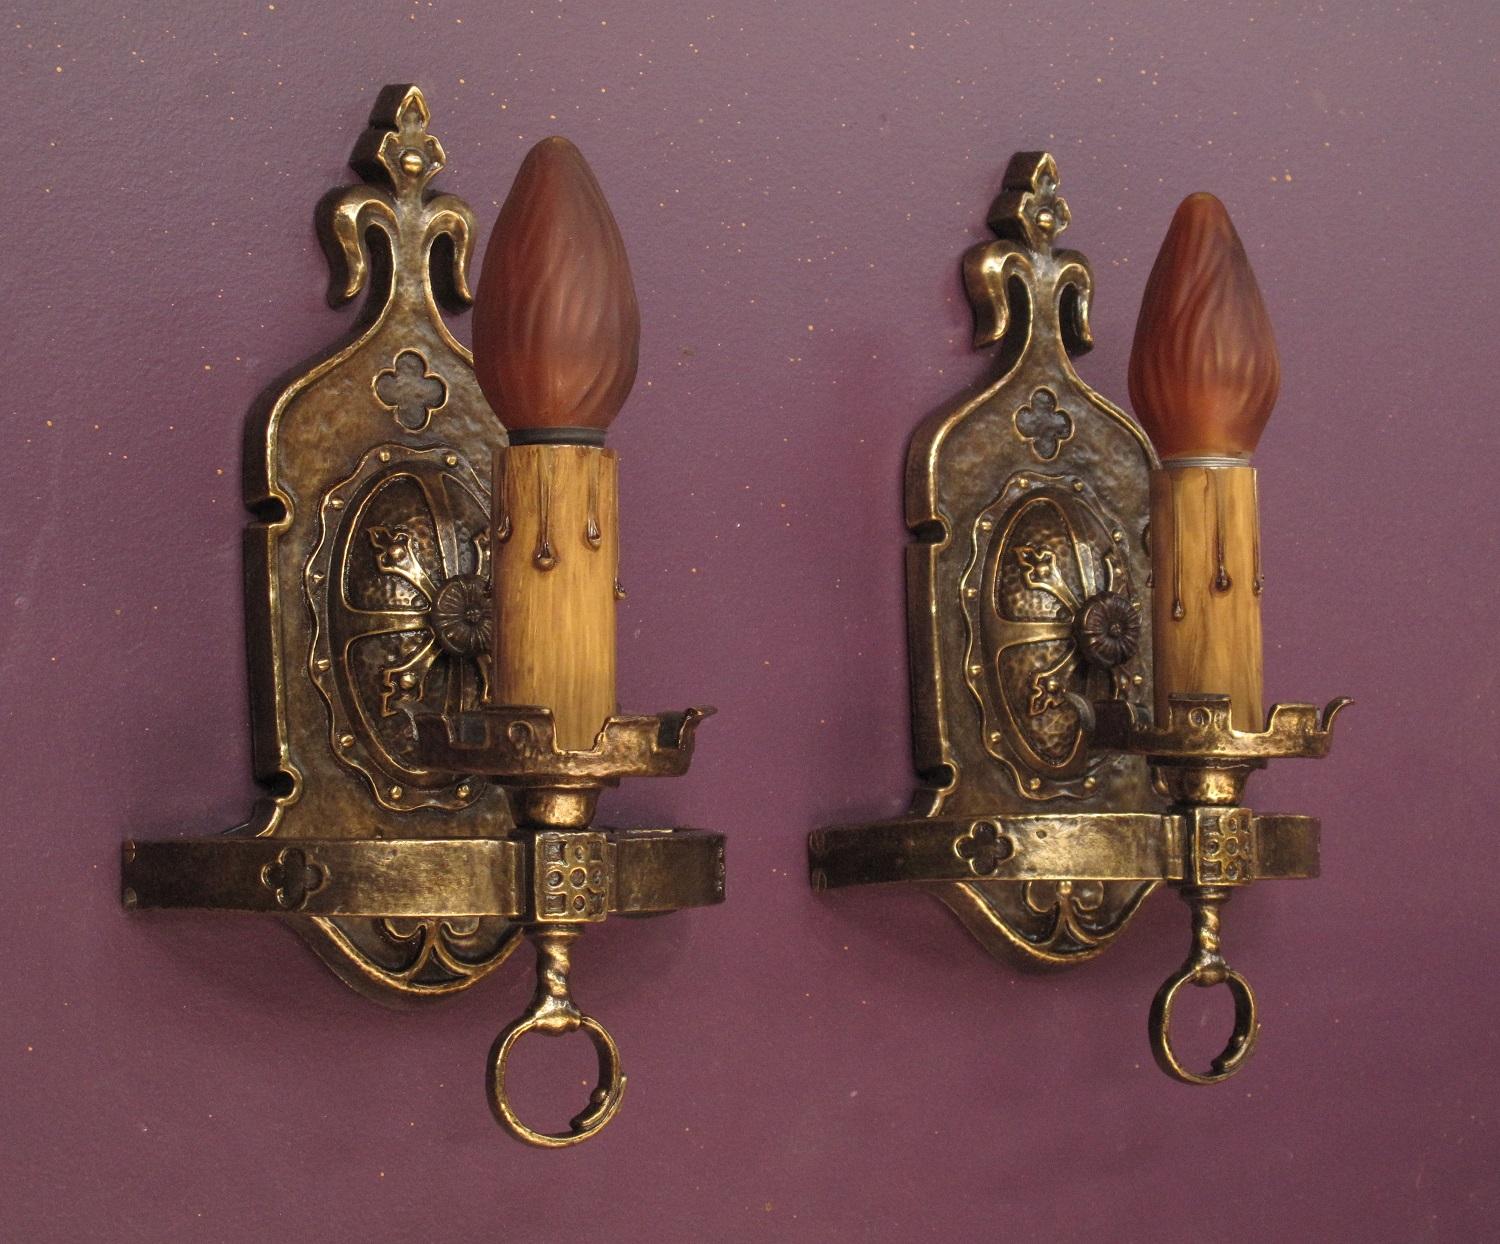 Priced per pair with two pair available.
Manufacture by Lion, these are hefty in both weight and design. Restored to bring out the solid cast brass construction as well as all the elements incorporated into the design. With no paint used in their